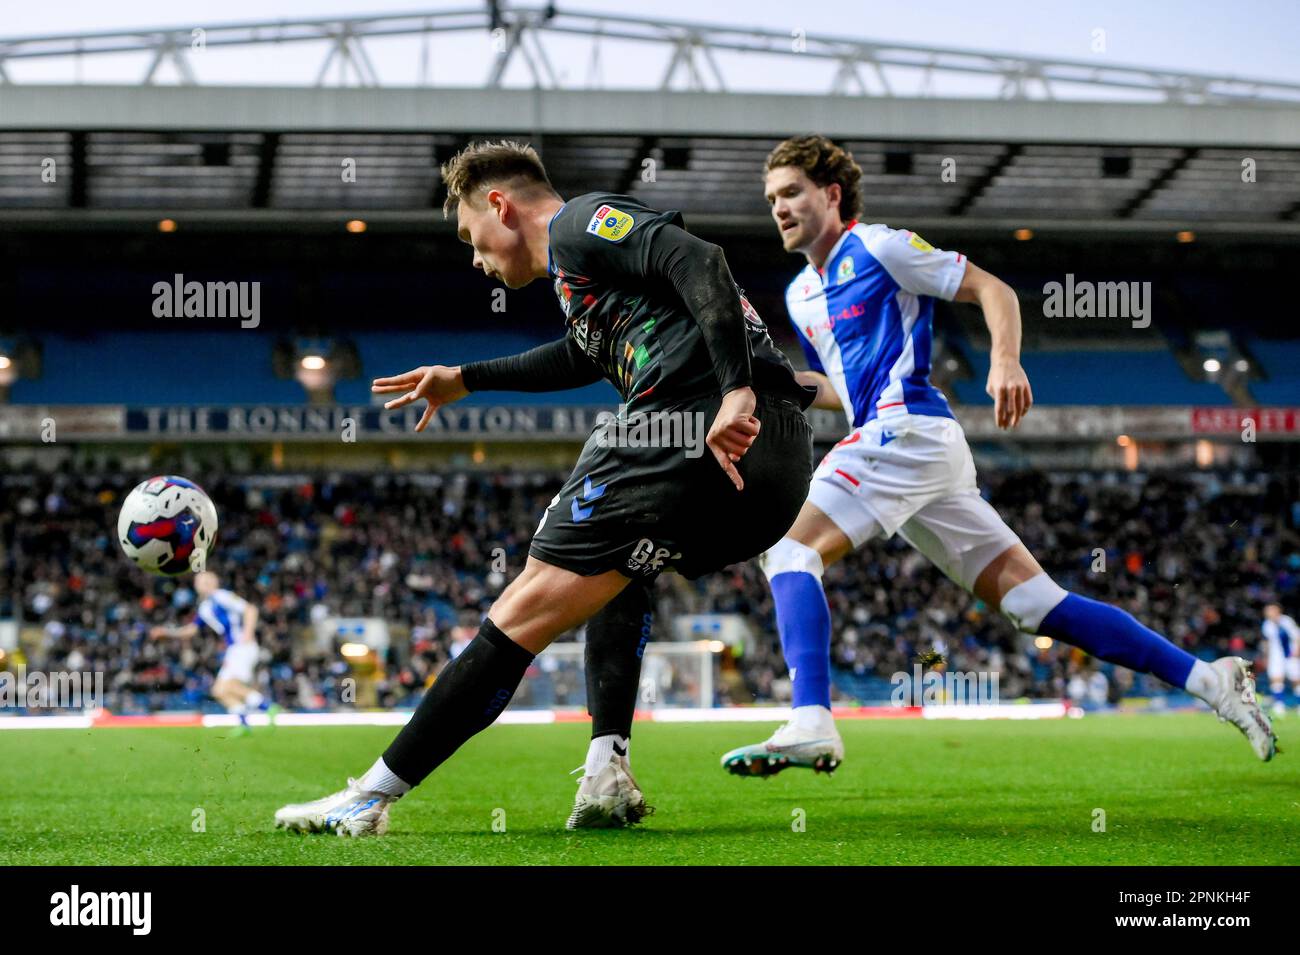 Callum Doyle #3 of Coventry City clears the ball during the Sky Bet Championship match Blackburn Rovers vs Coventry City at Ewood Park, Blackburn, United Kingdom, 19th April 2023  (Photo by Ben Roberts/News Images) Stock Photo